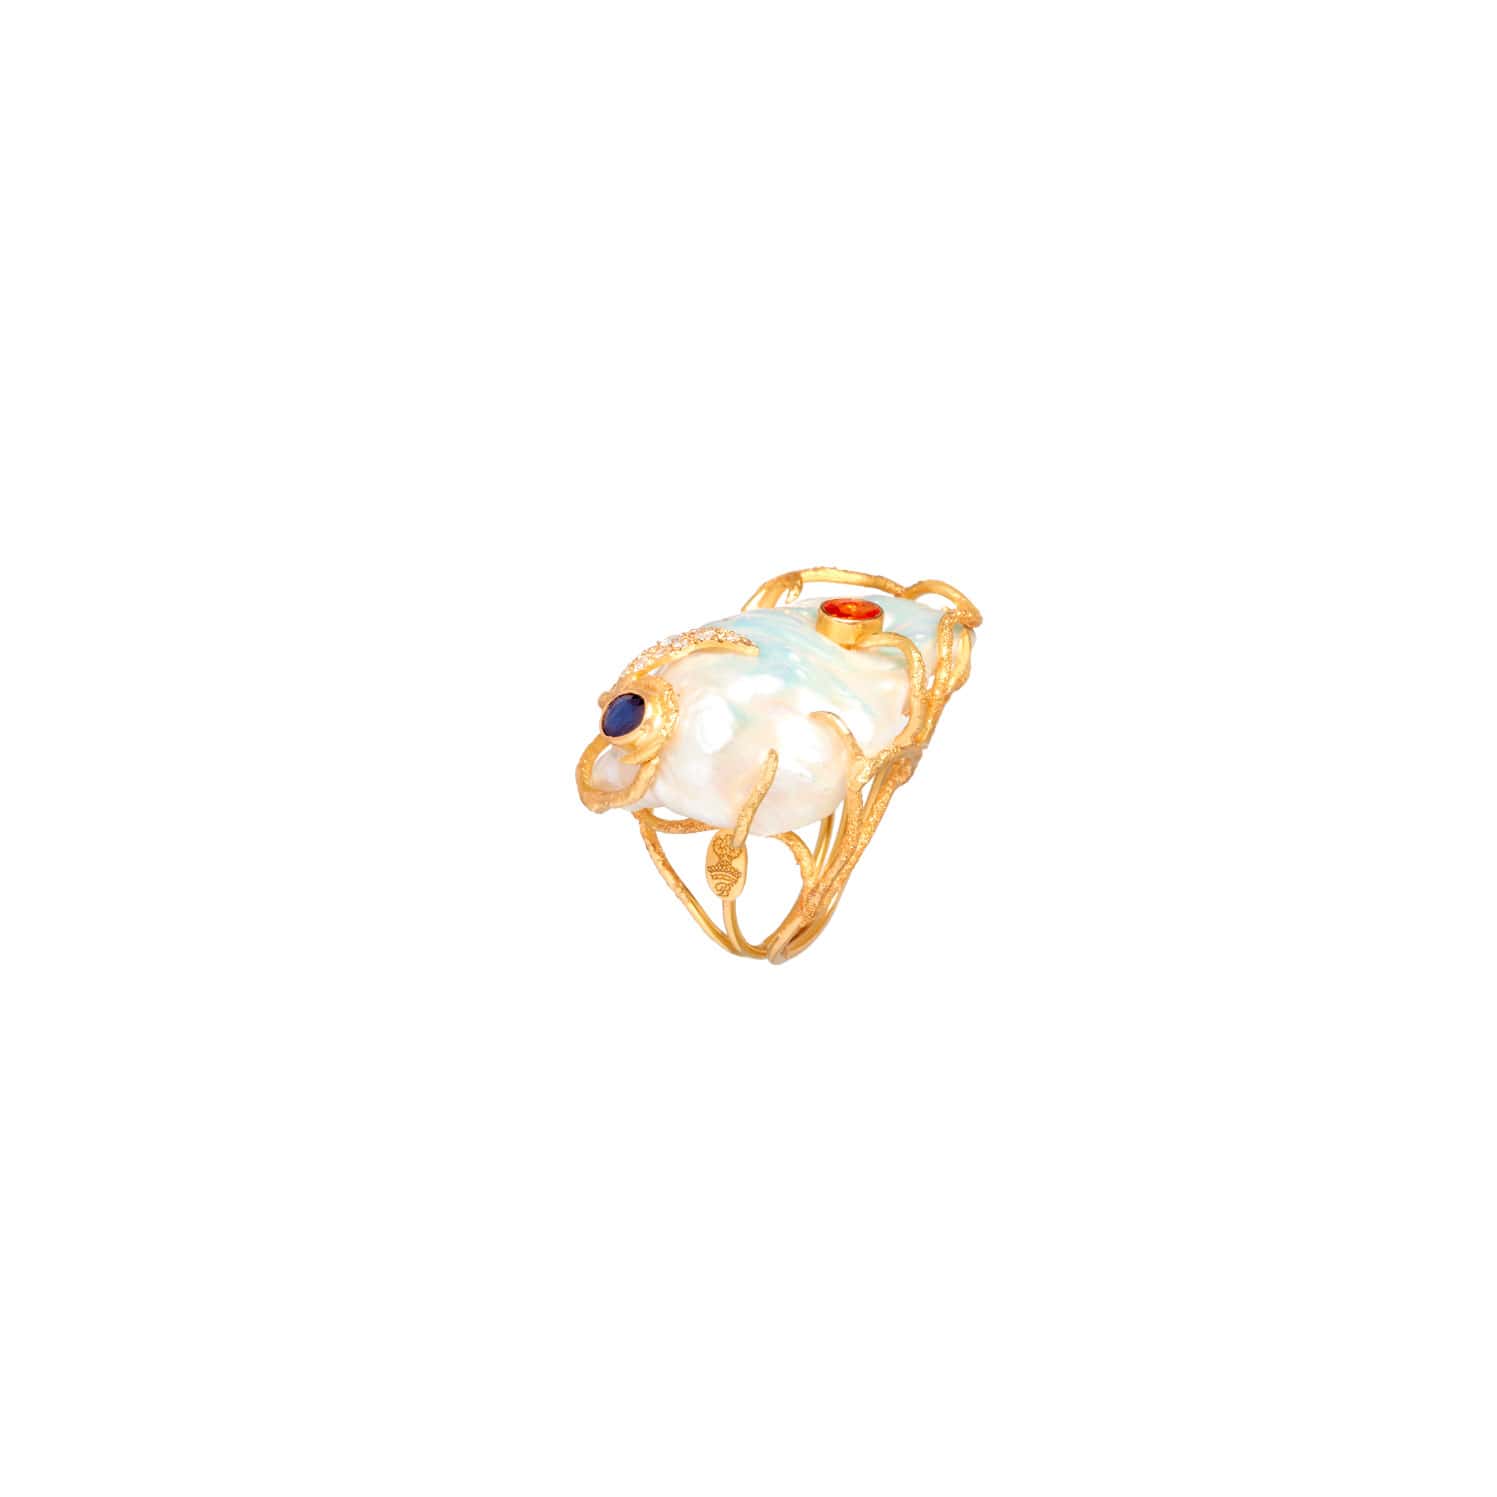 PEARL AND LIFE RING